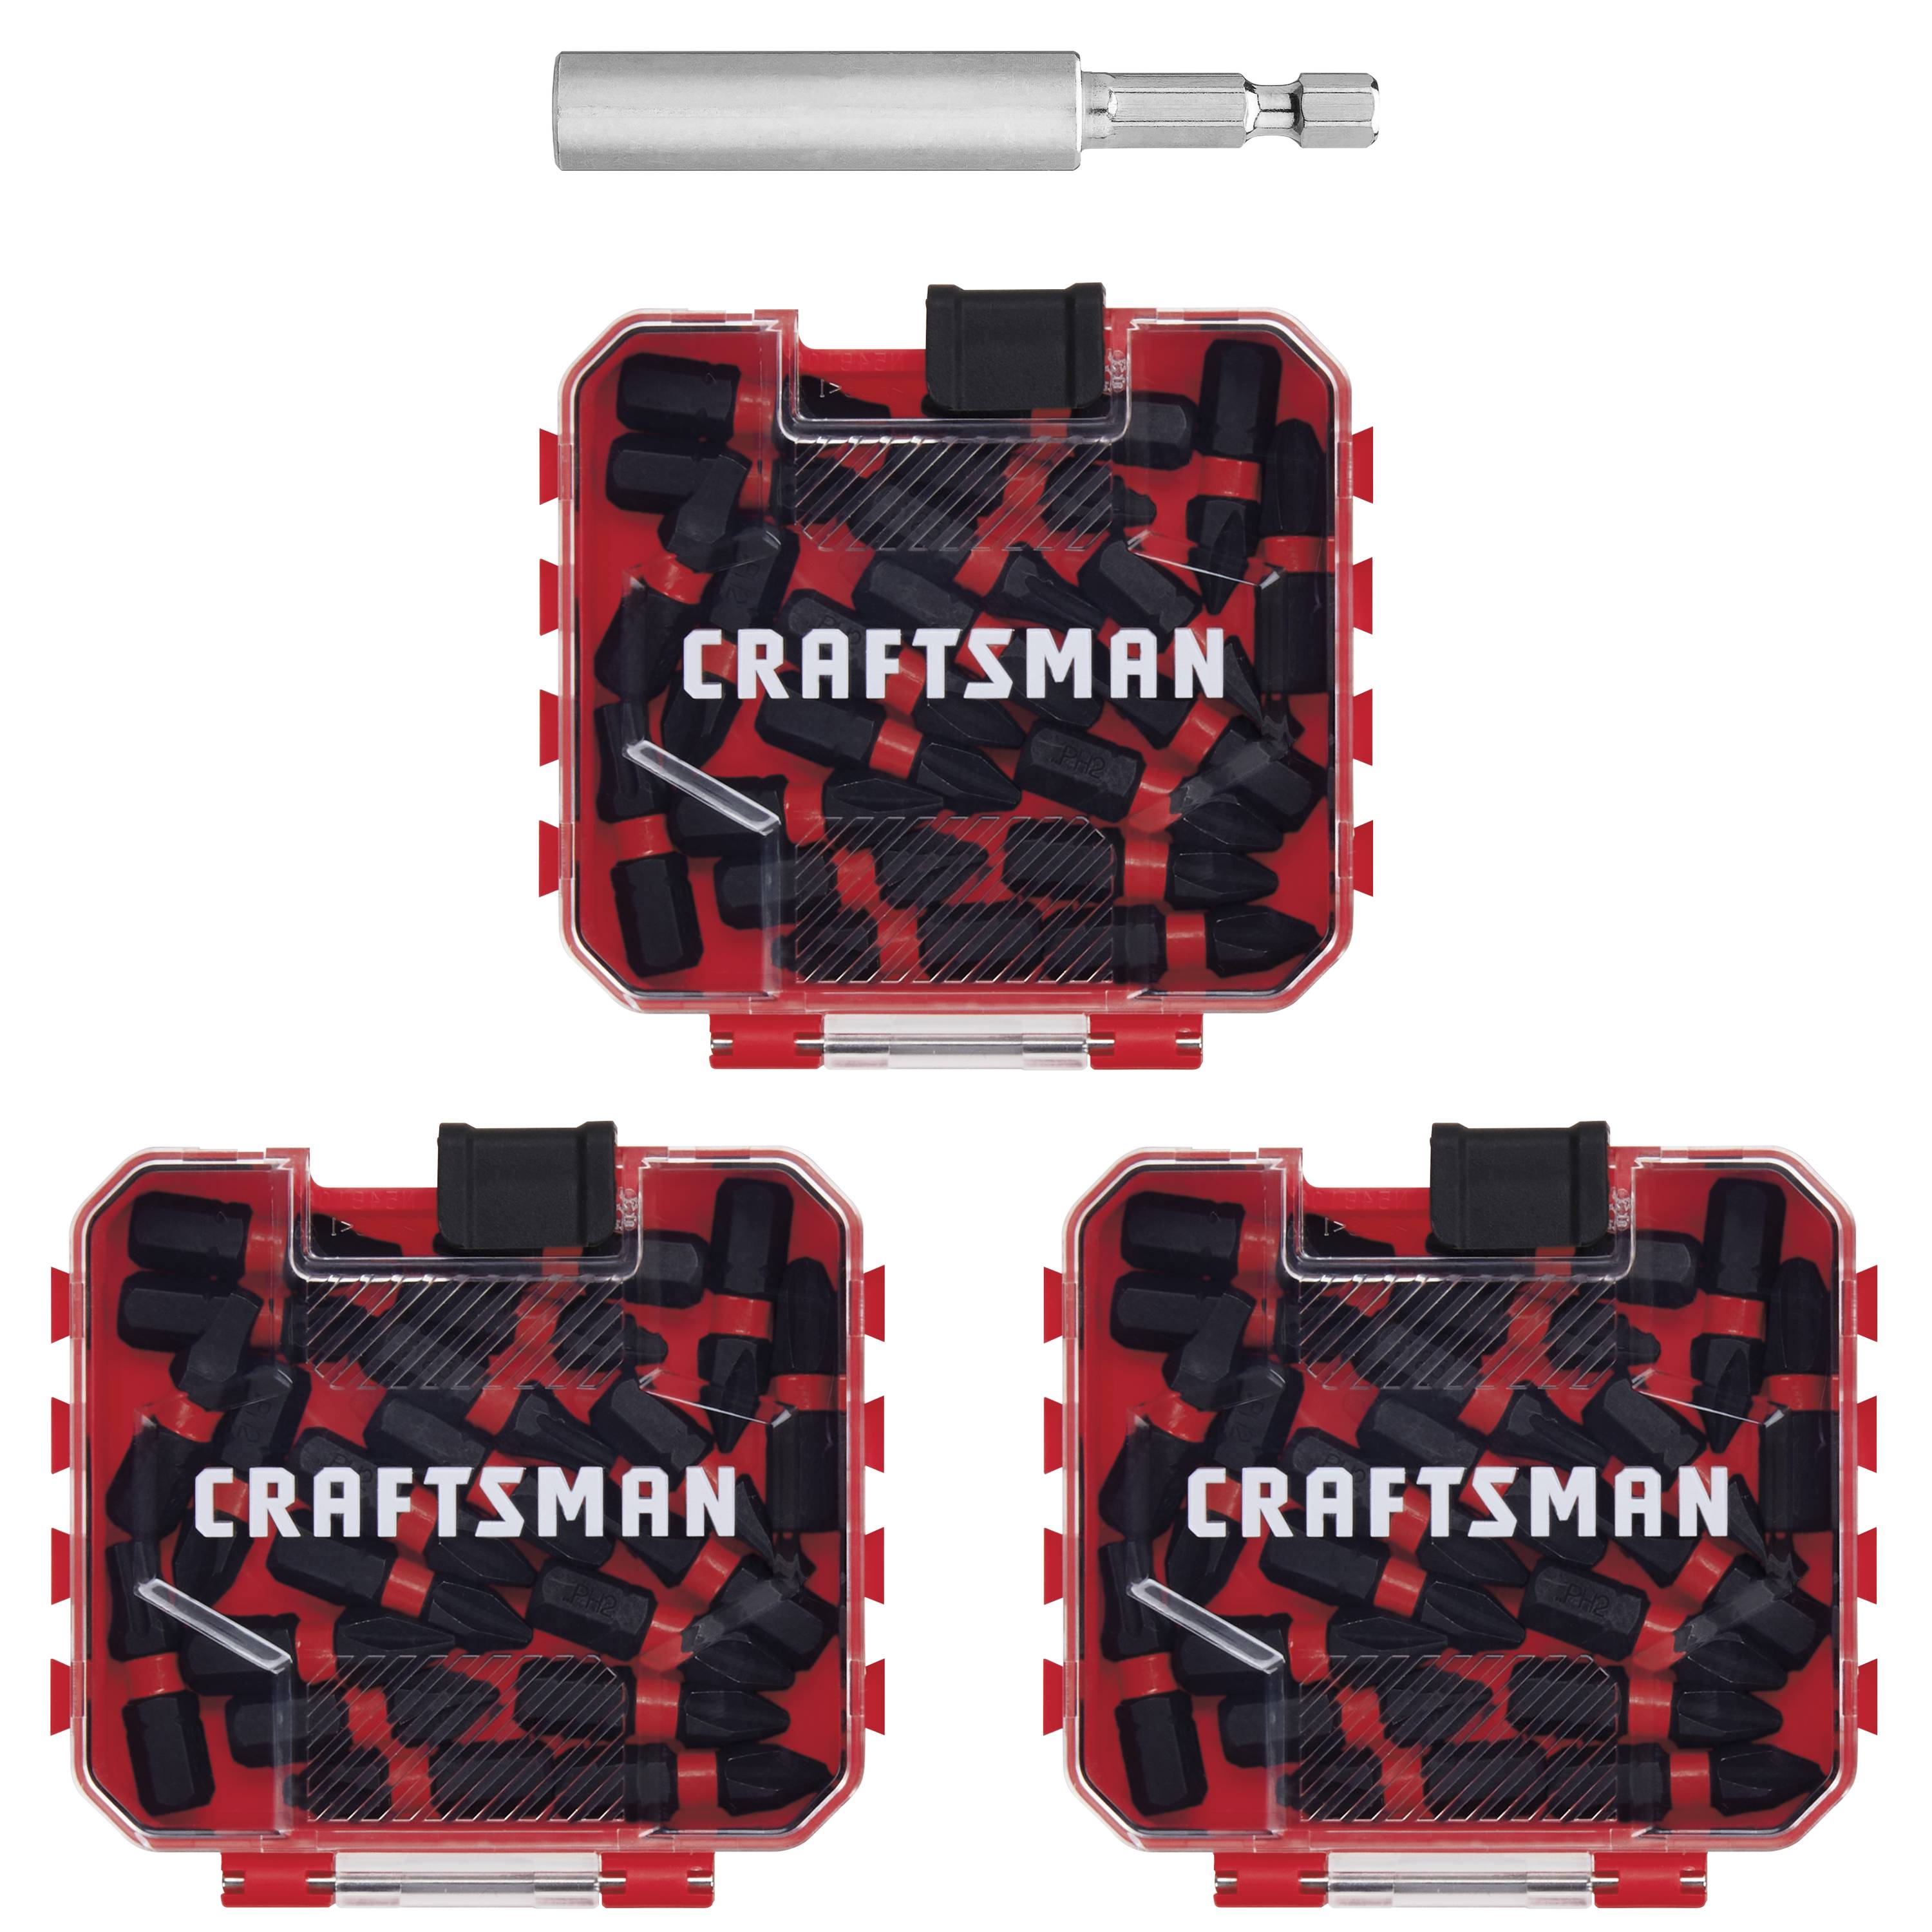 CRAFTSMAN Impact Rated 1-in Set Screwdriver Screwdriver department the at in (60-Piece) Bit Bits